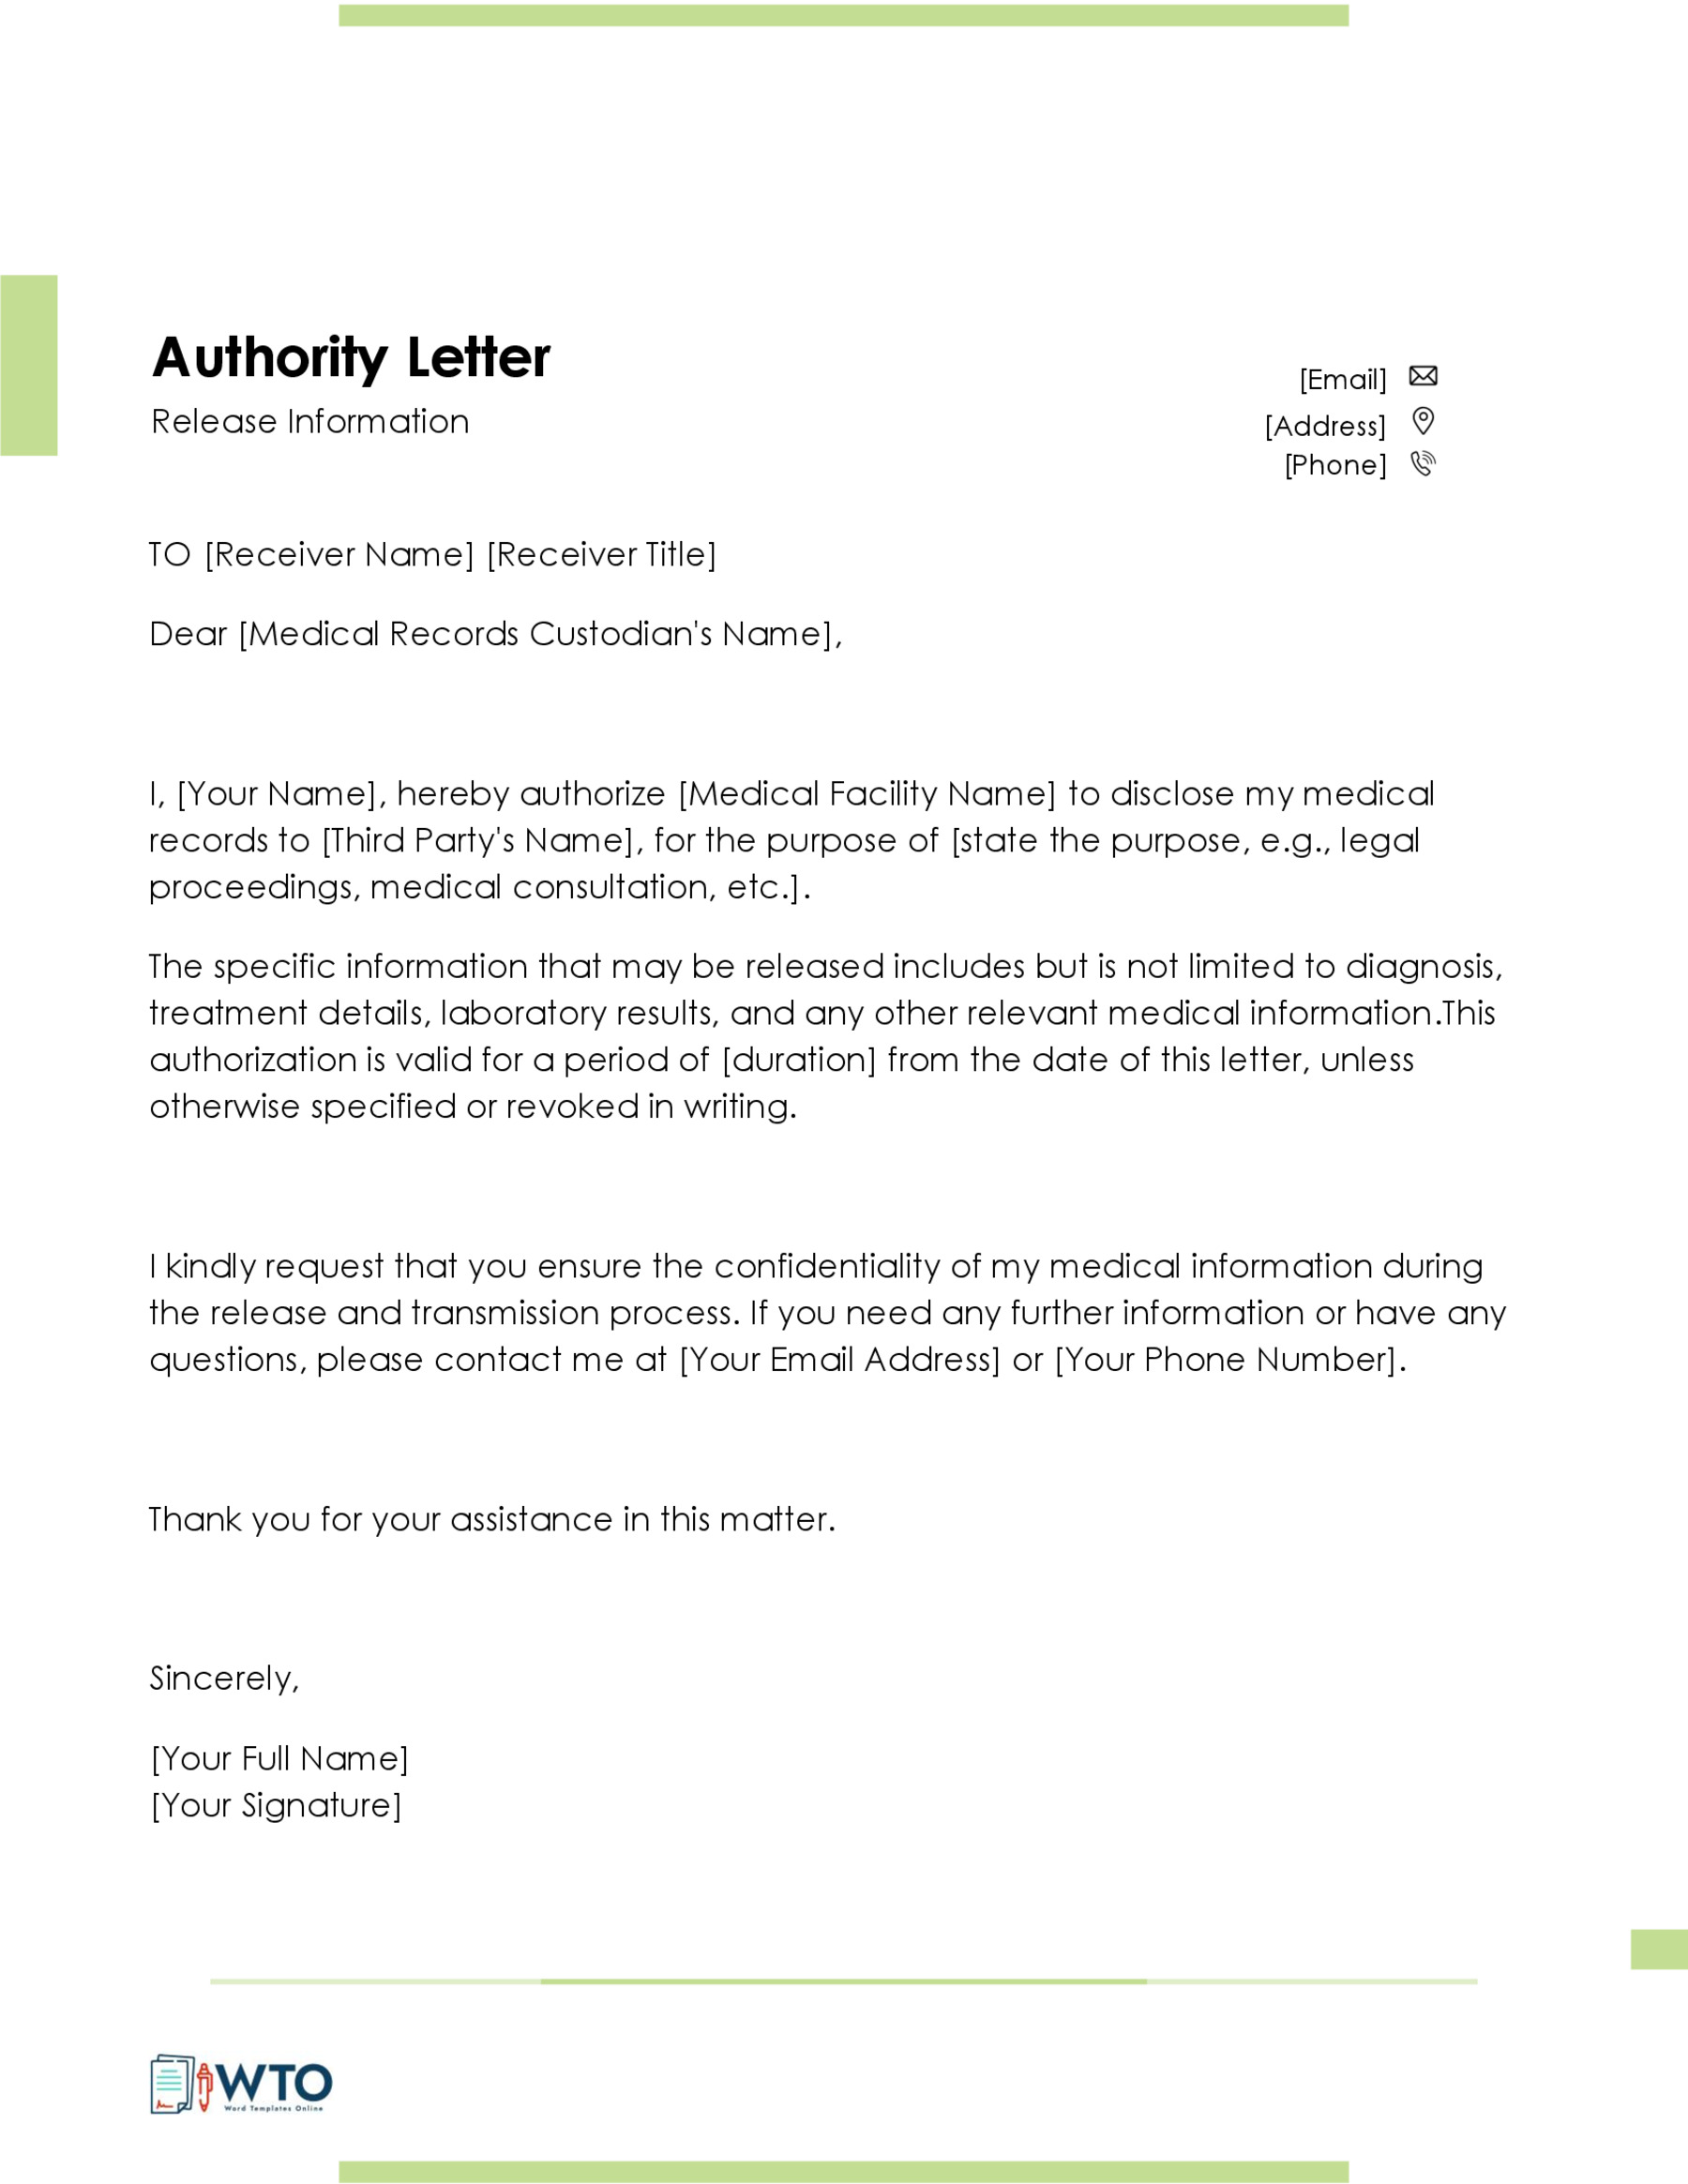 Free Letter to Release Information Template in word format